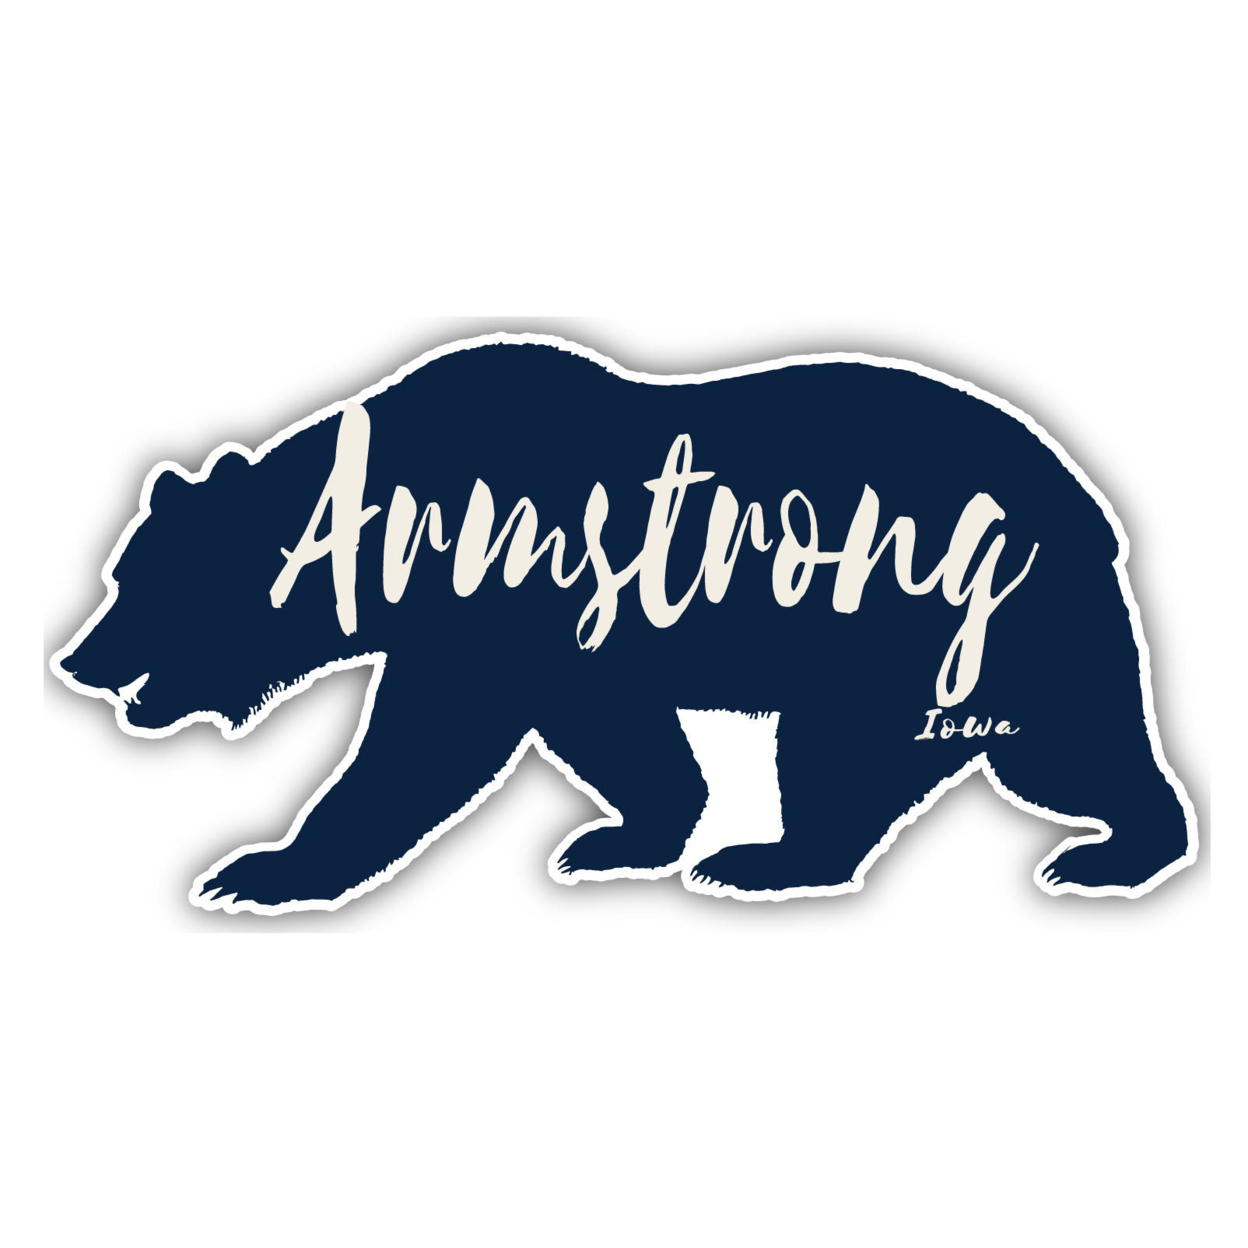 Armstrong Iowa Souvenir Decorative Stickers (Choose Theme And Size) - 4-Pack, 10-Inch, Bear